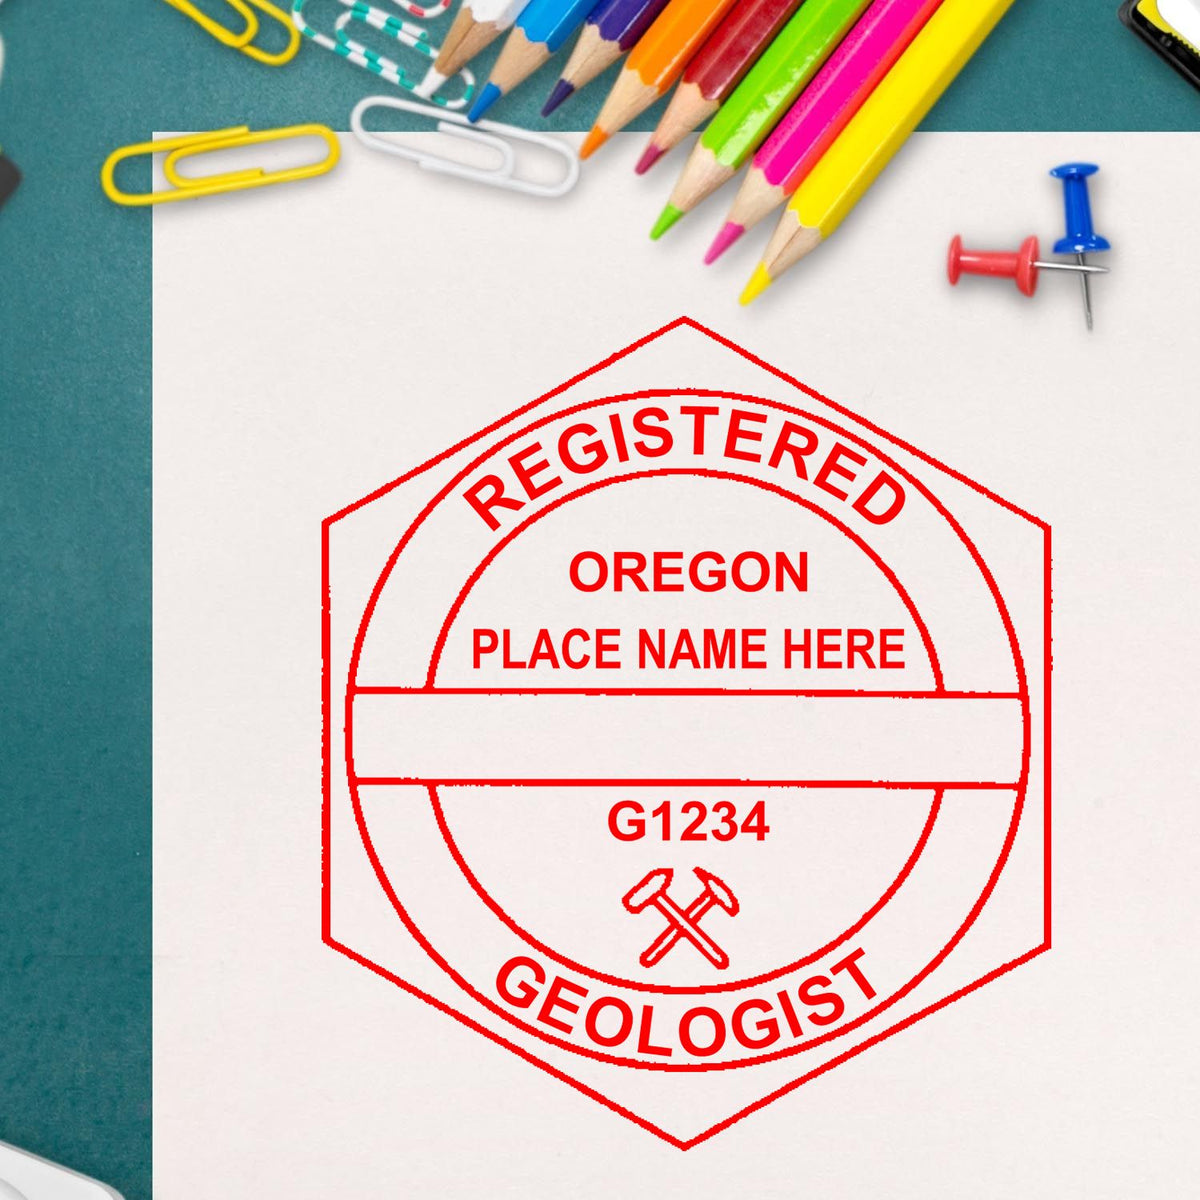 A lifestyle photo showing a stamped image of the Oregon Professional Geologist Seal Stamp on a piece of paper